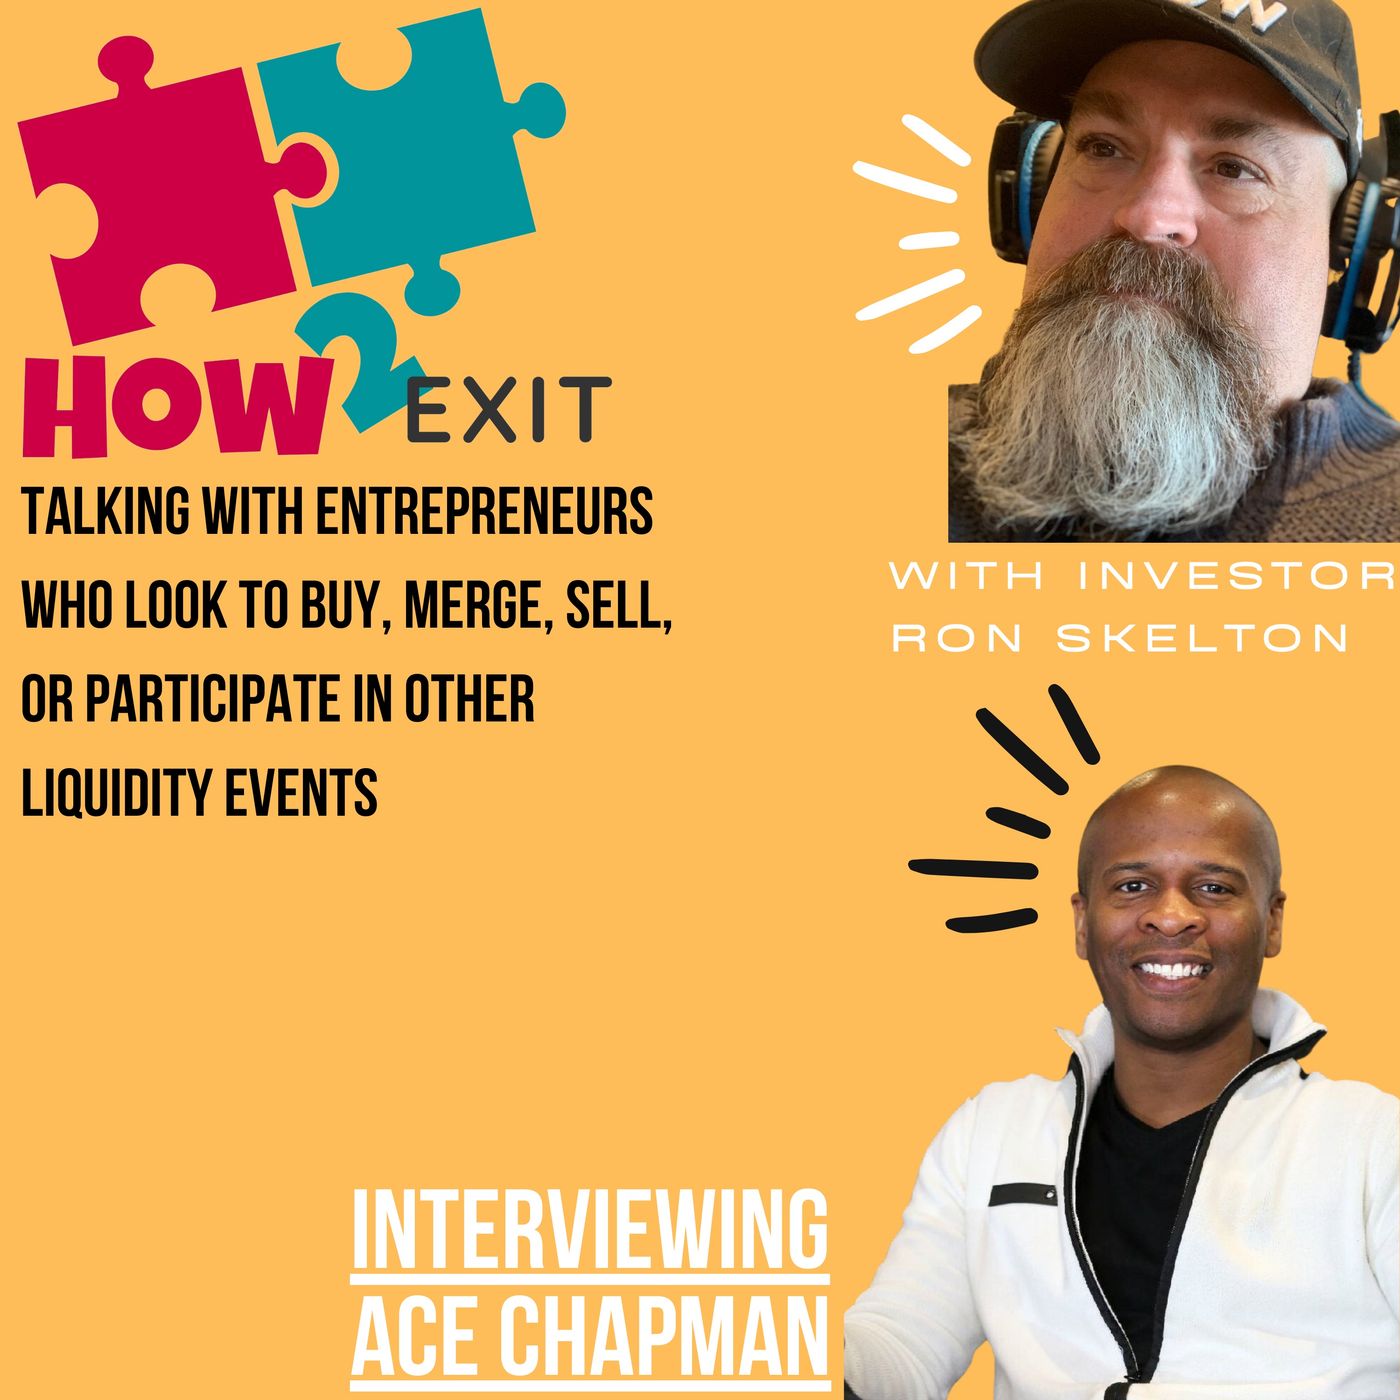 How2Exit: Mentor Mini Series Episode 6: Ace Chapman - been acquiring businesses for over 20 years. Image